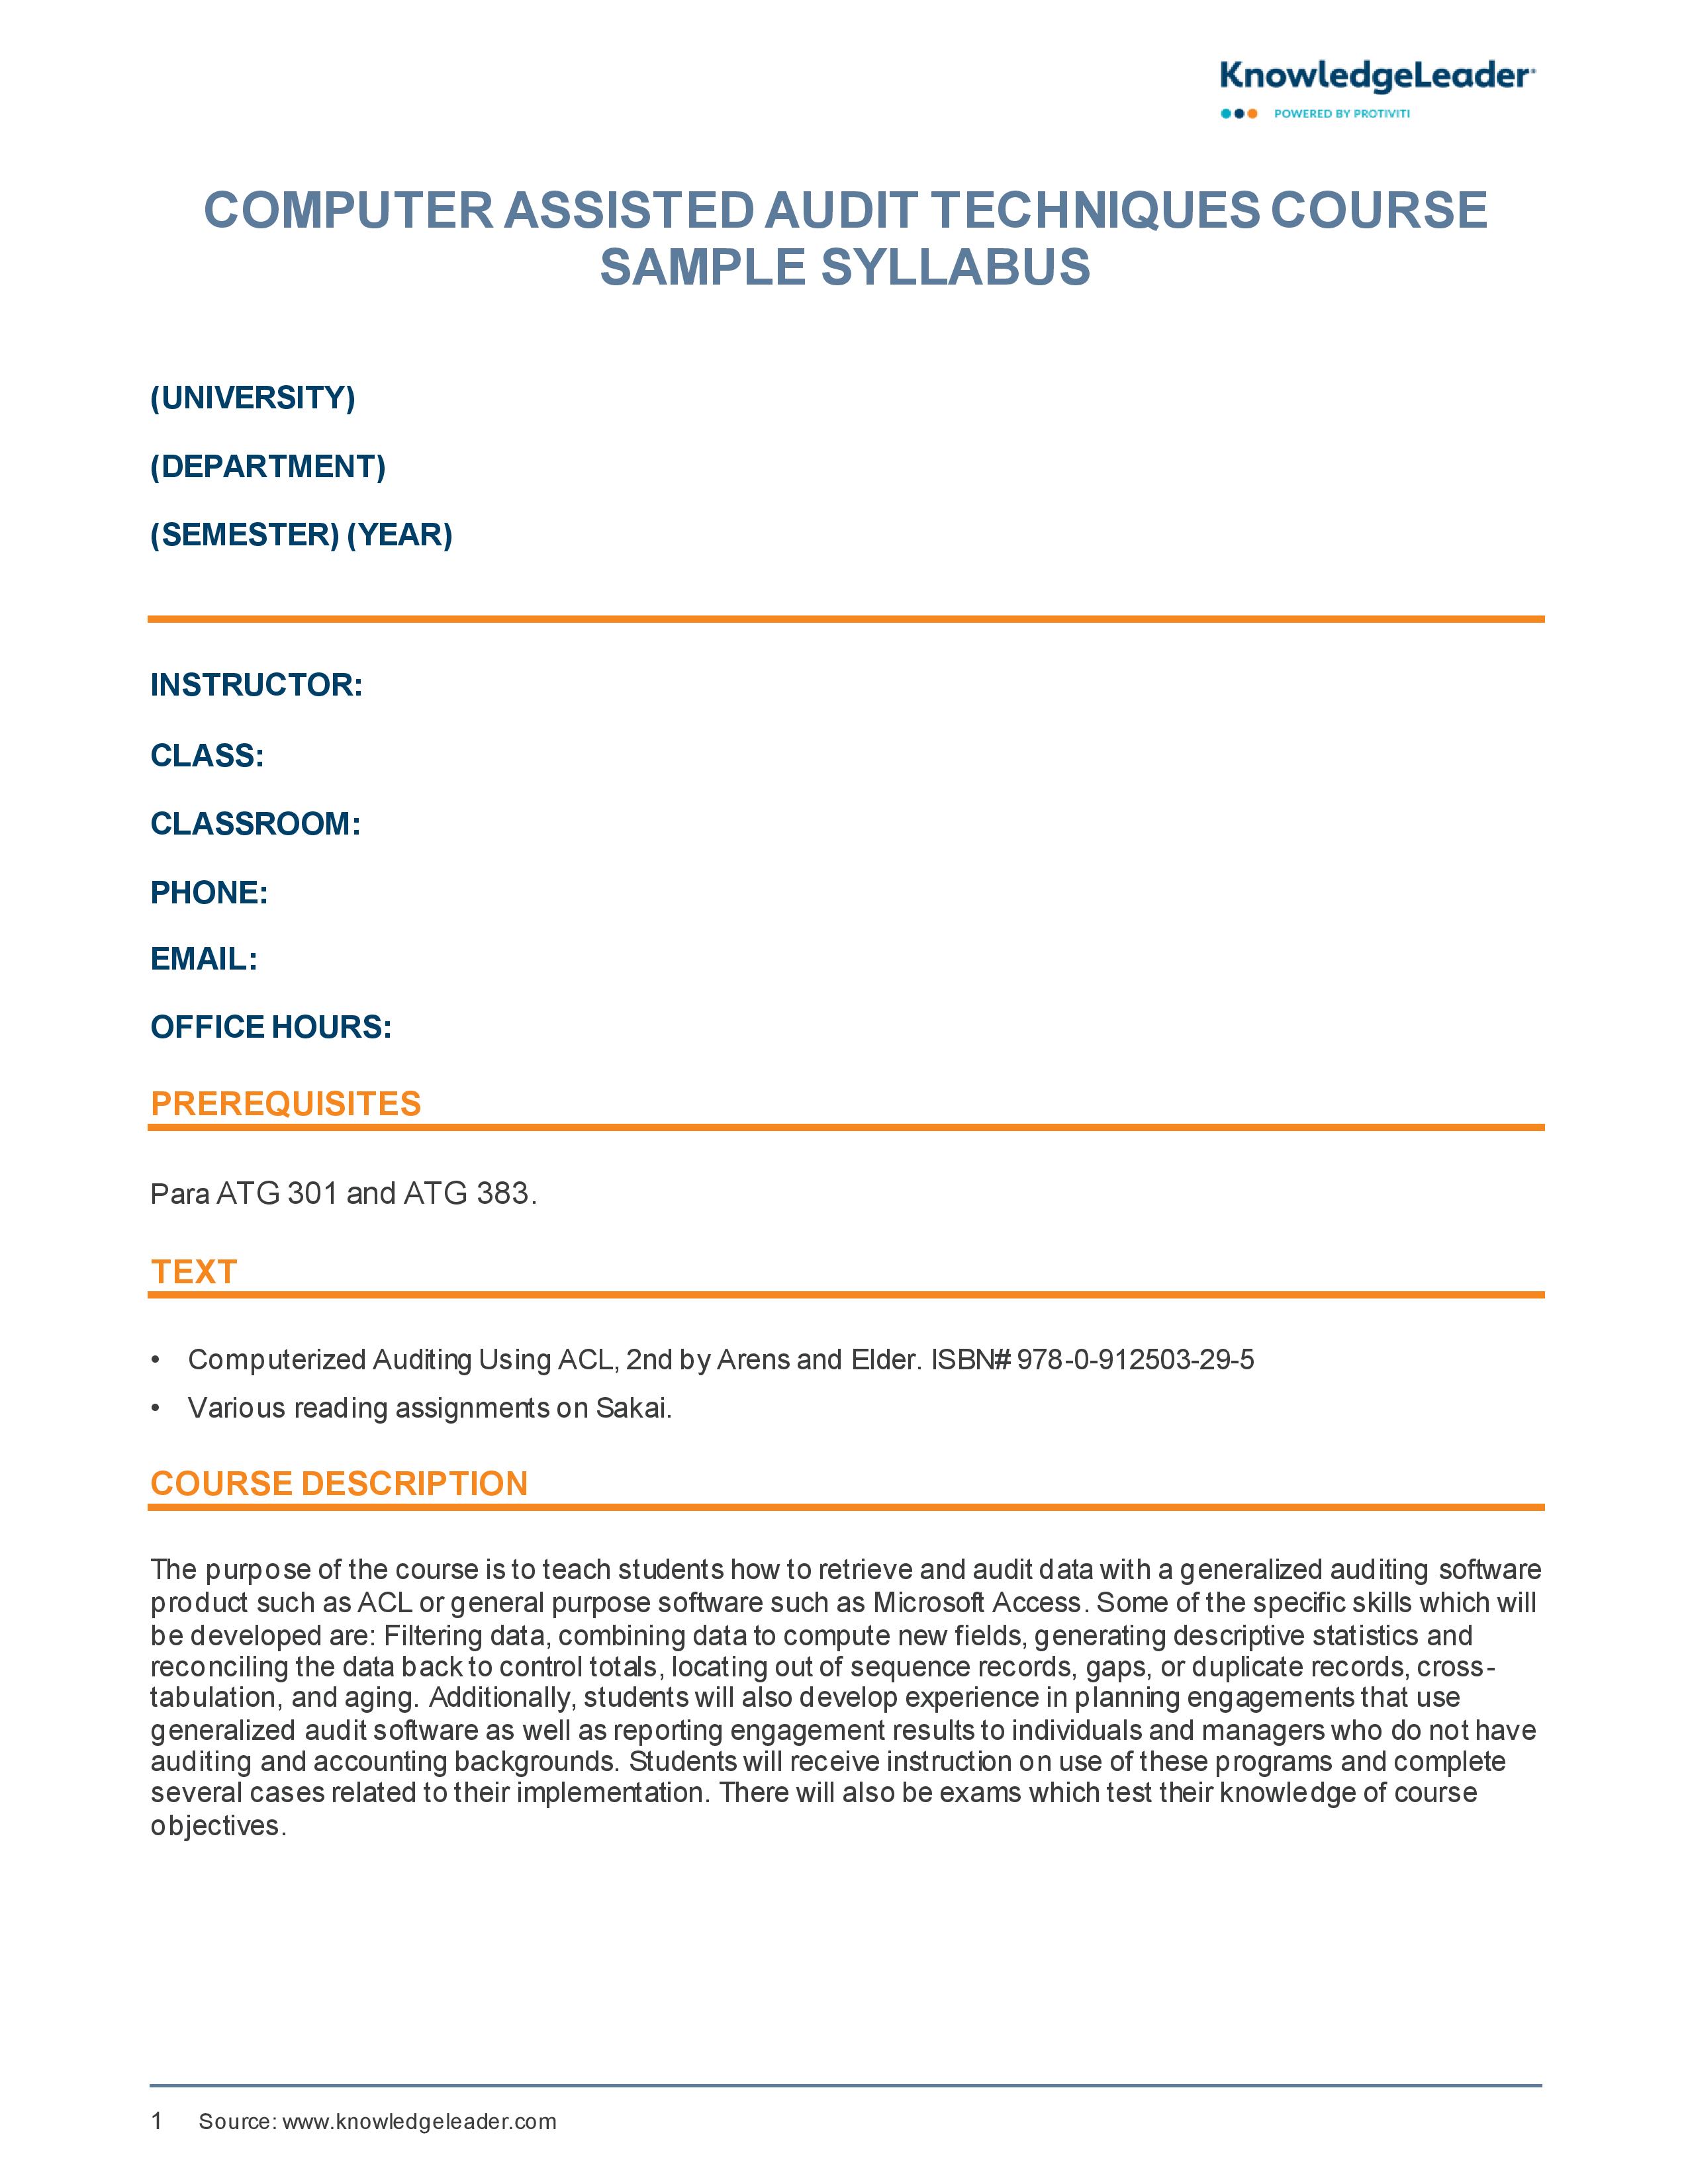 Screenshot of the first page of Computer Assisted Audit Techniques Sample Syllabus